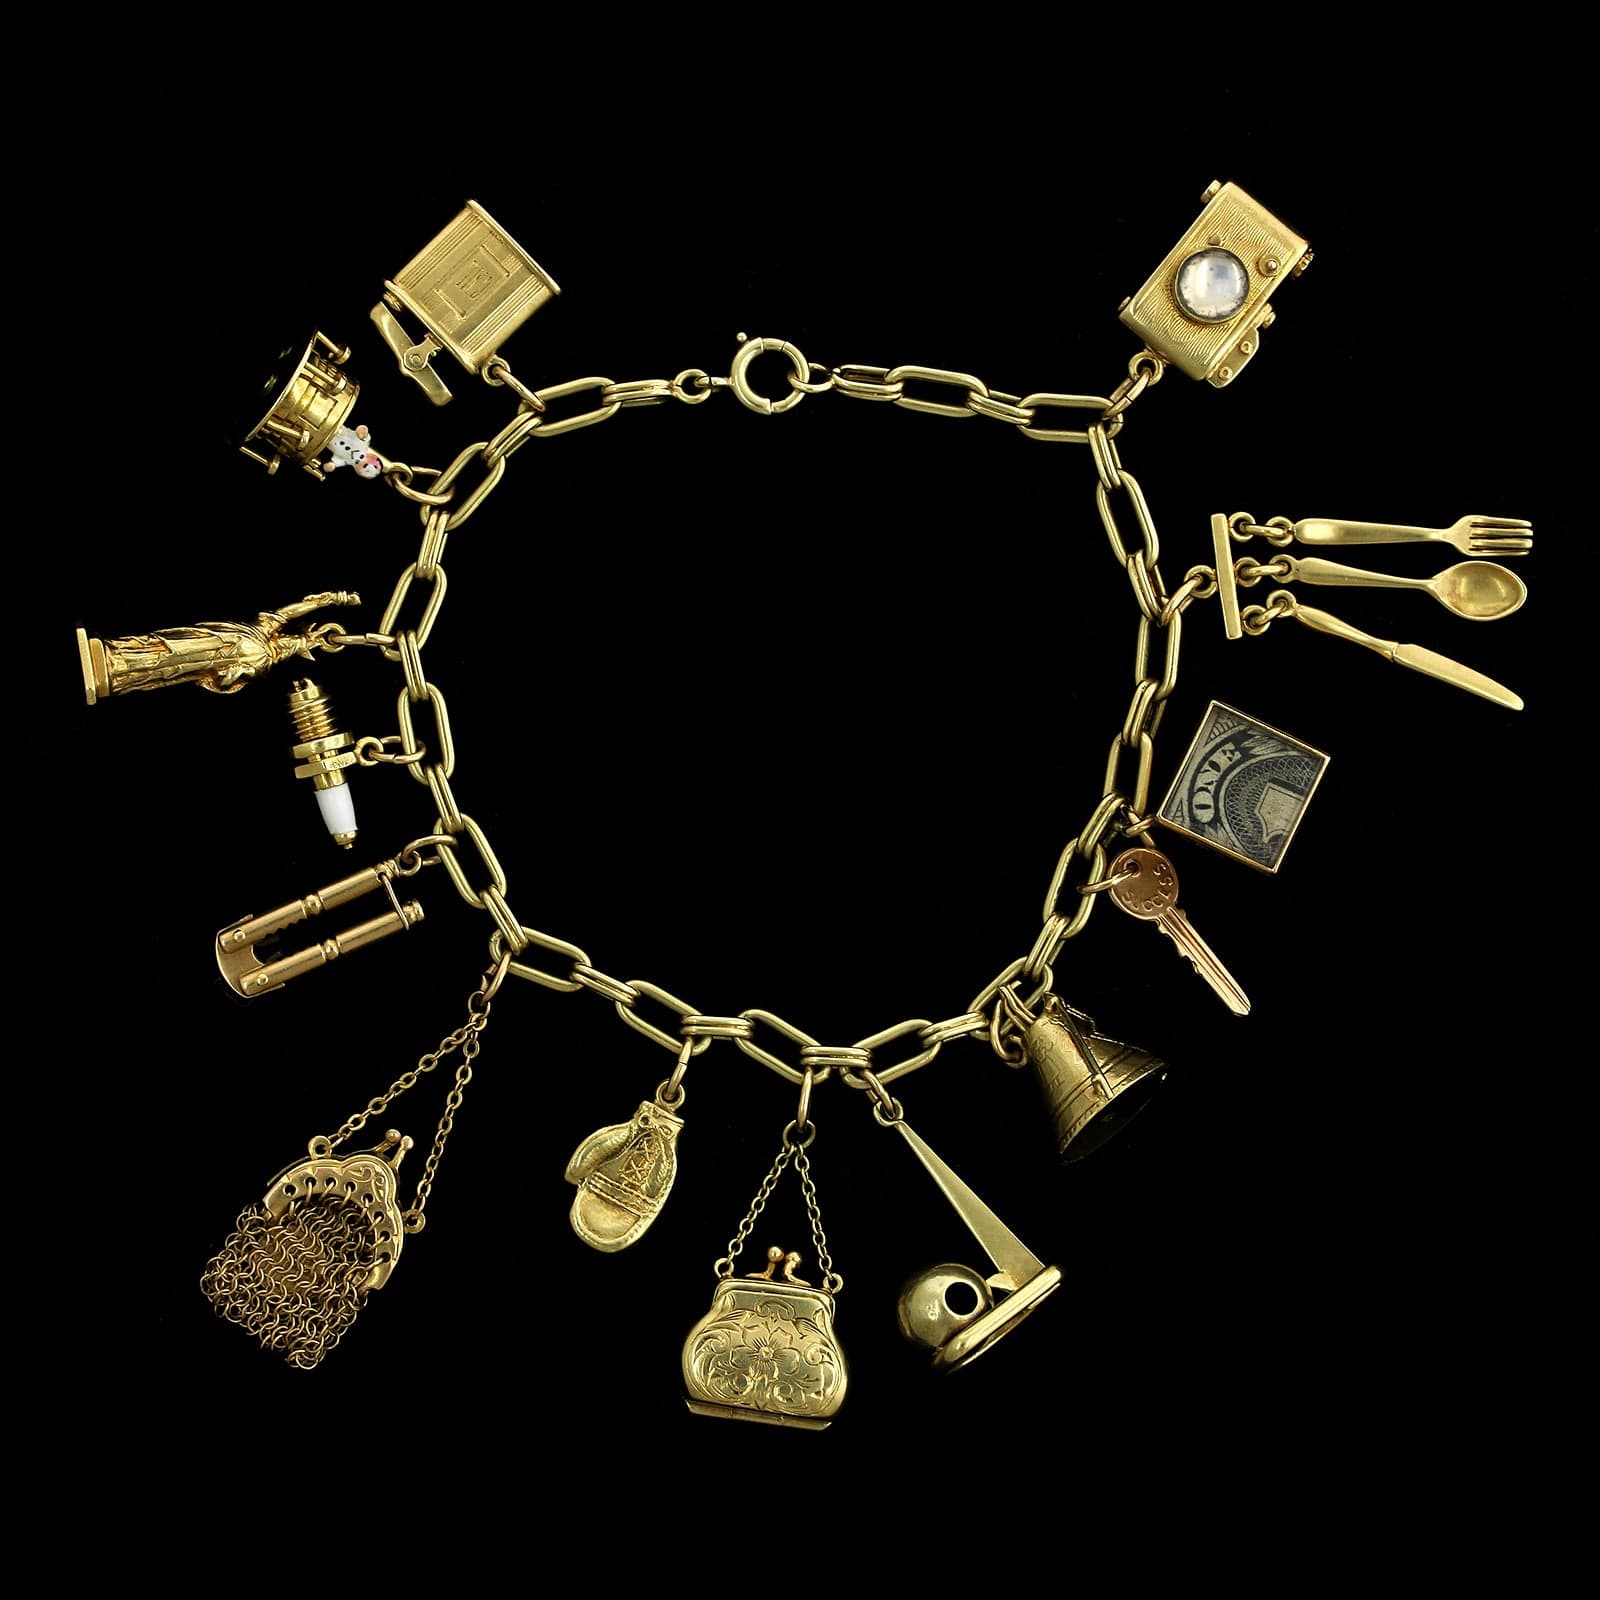 9ct Rose Gold and 9ct Yellow Gold Charm Bracelets (Bracelet type: Yellow Gold Charm Bracelet)